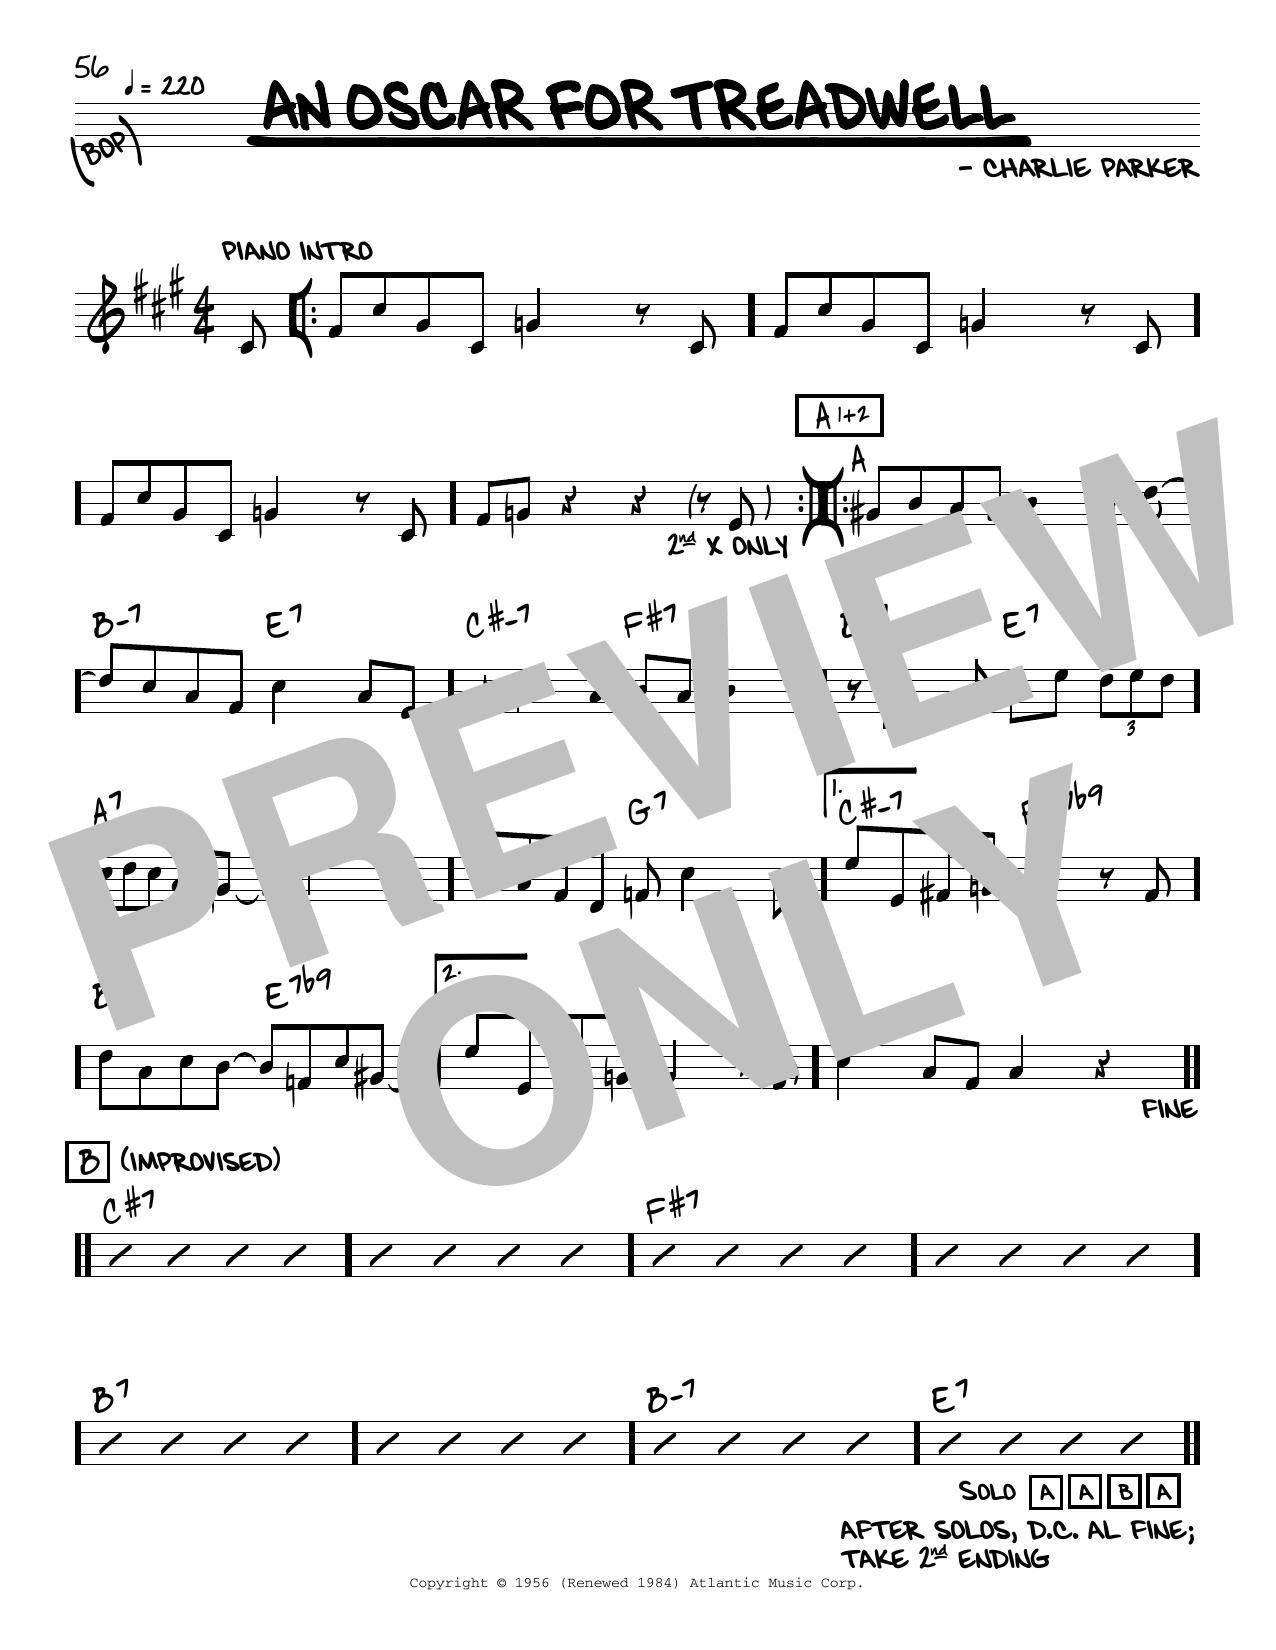 Download Charlie Parker An Oscar For Treadwell Sheet Music